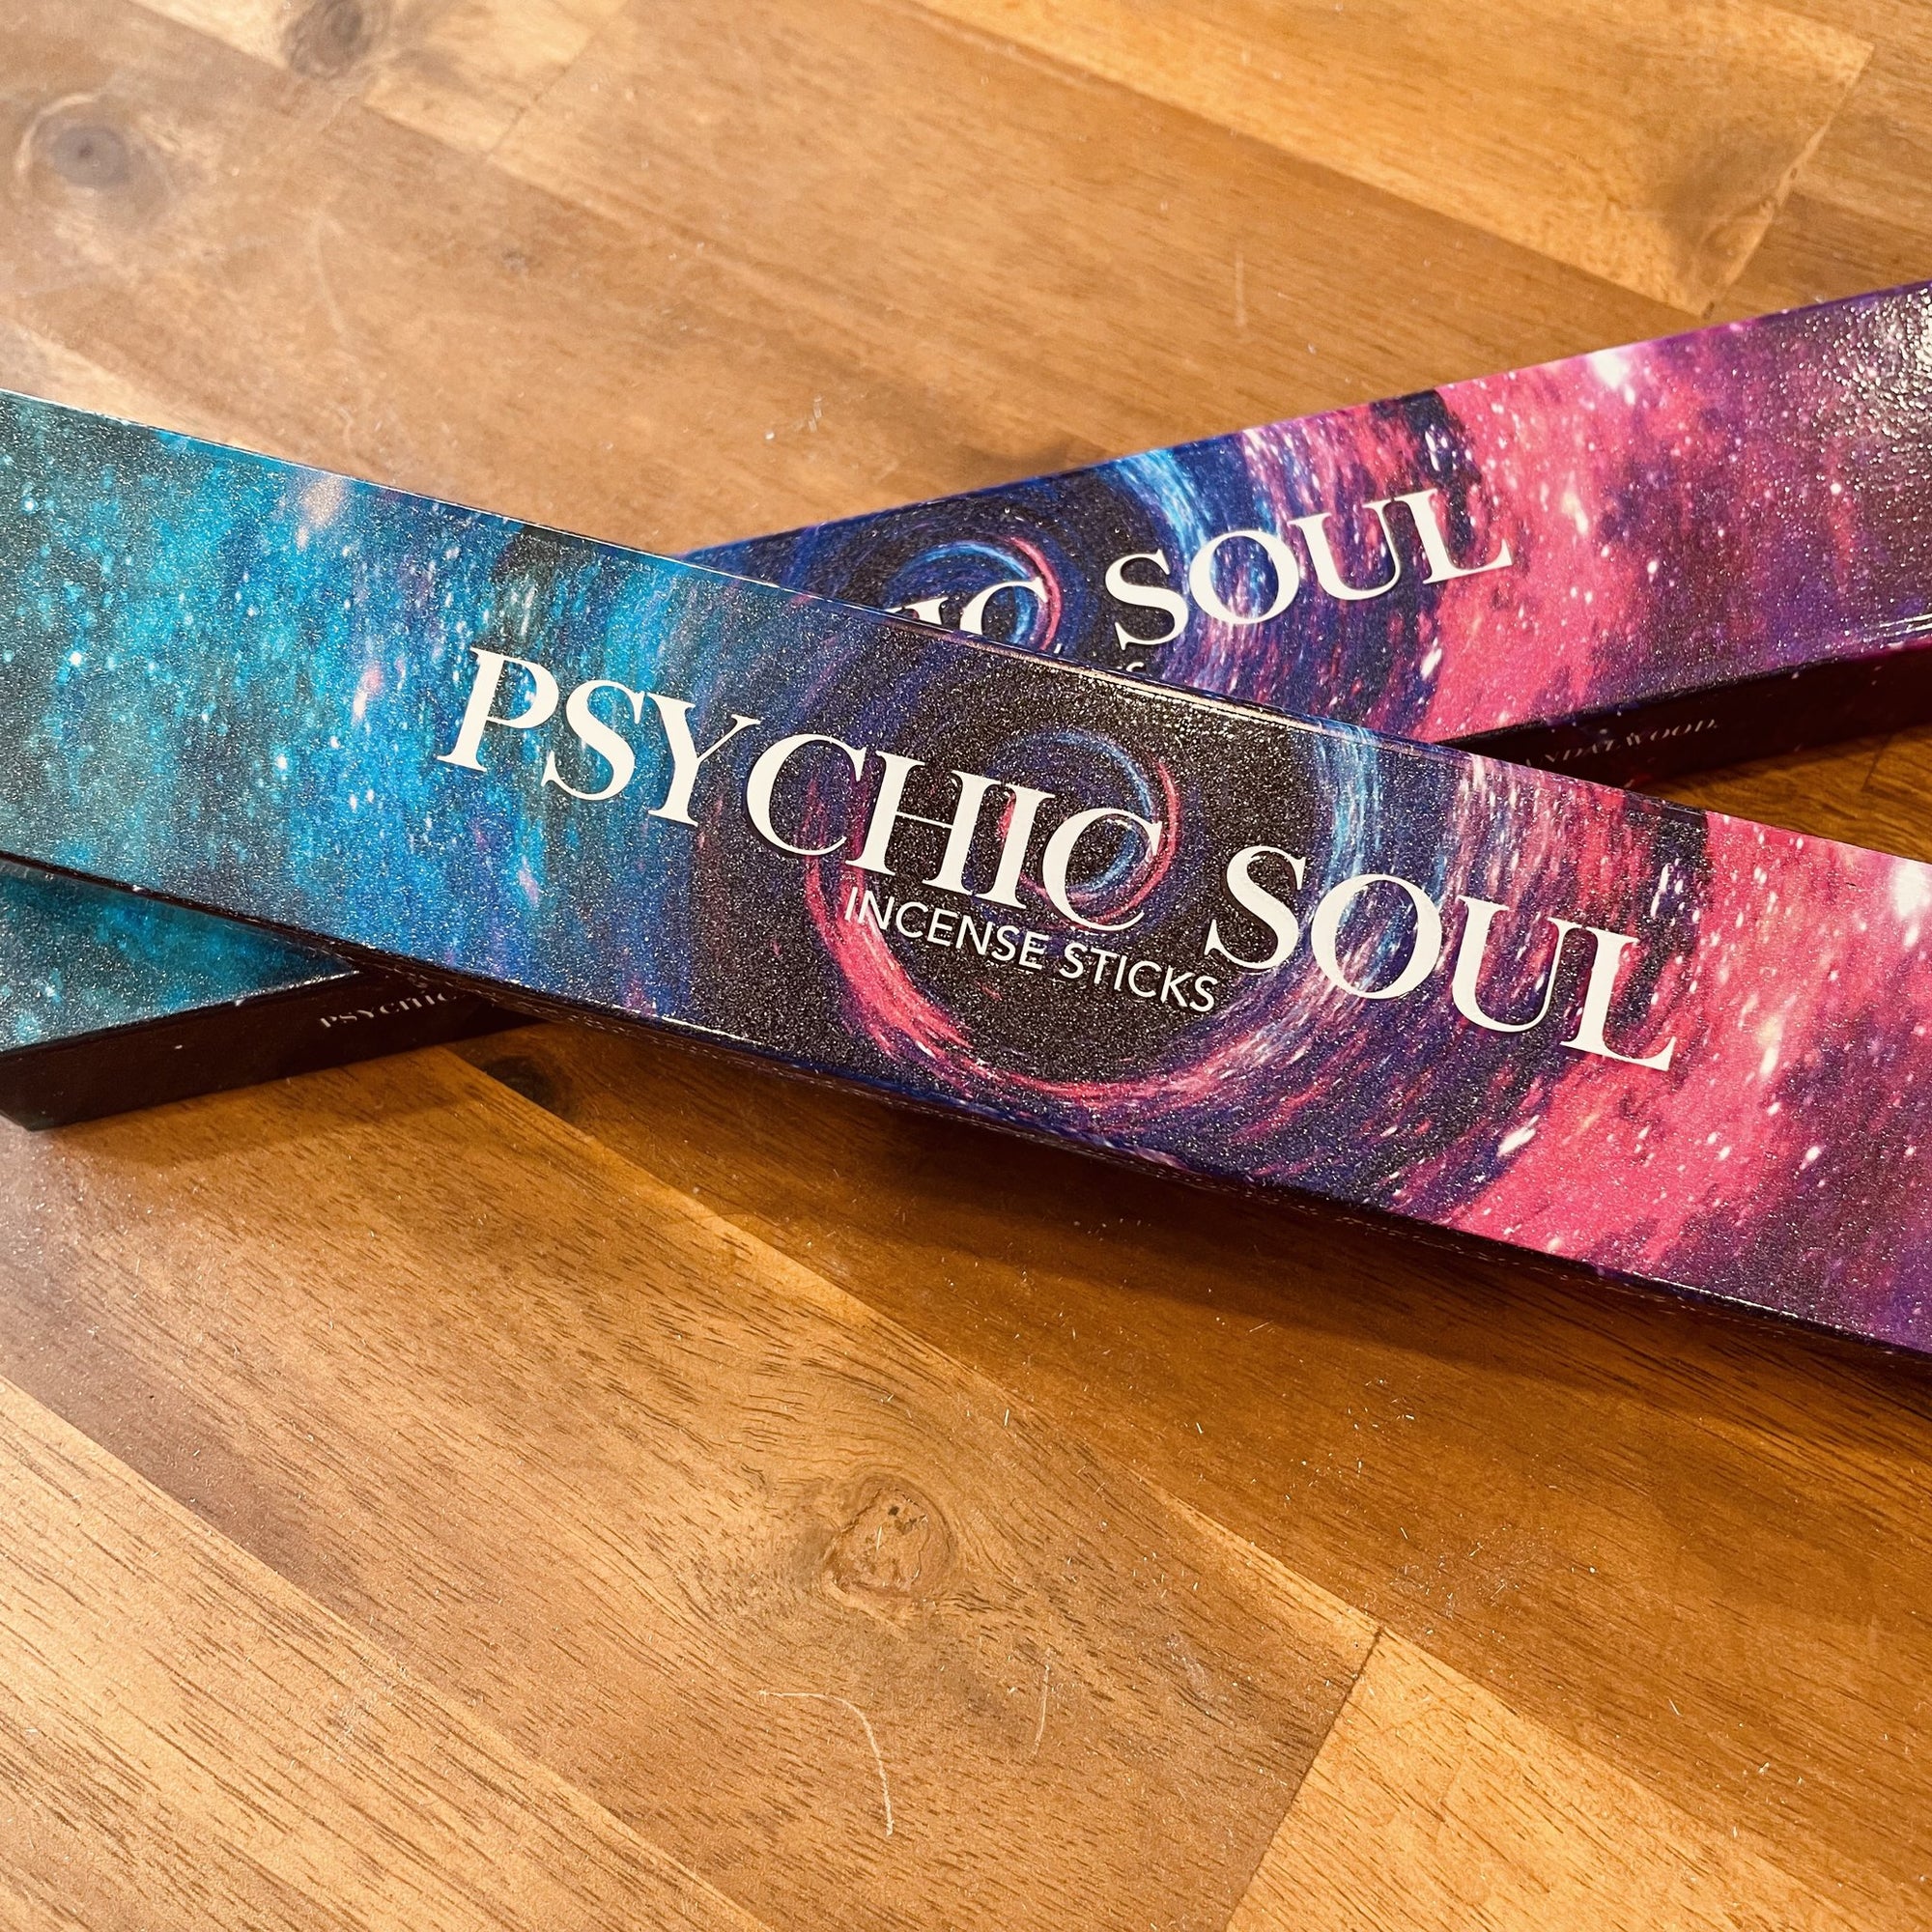 New Moon Psychic Soul Incense 15g - The Spirit of Life